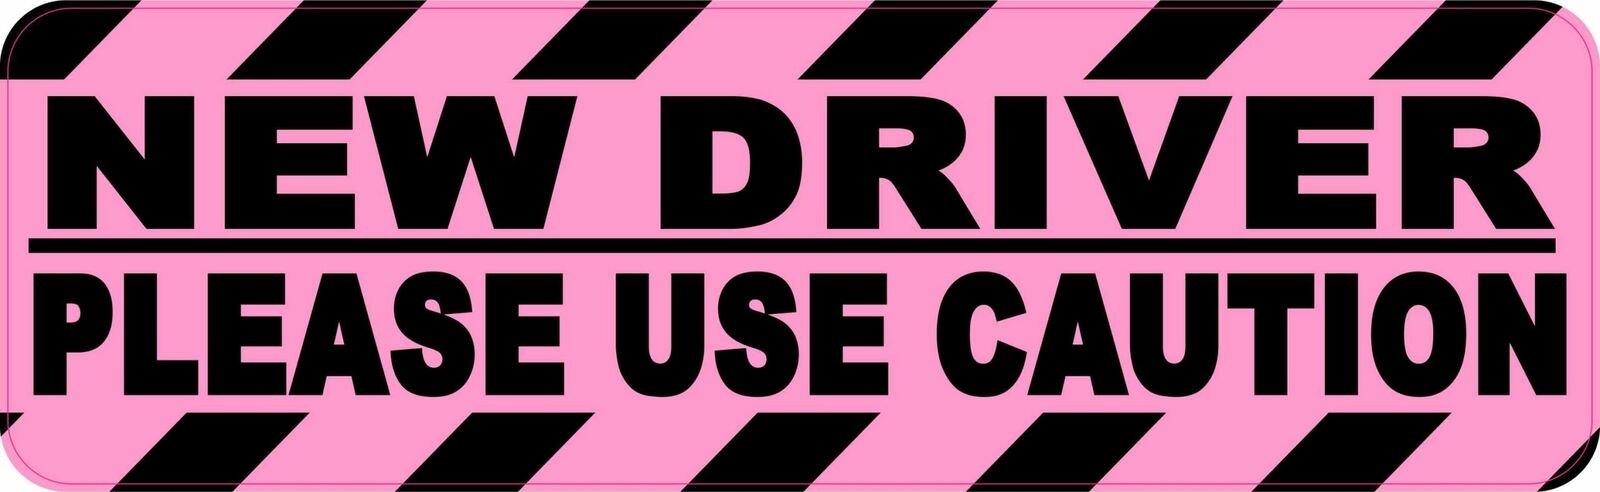 10in x 3in Use Caution New Driver Vinyl Sticker Car Truck Vehicle Bumper Decal